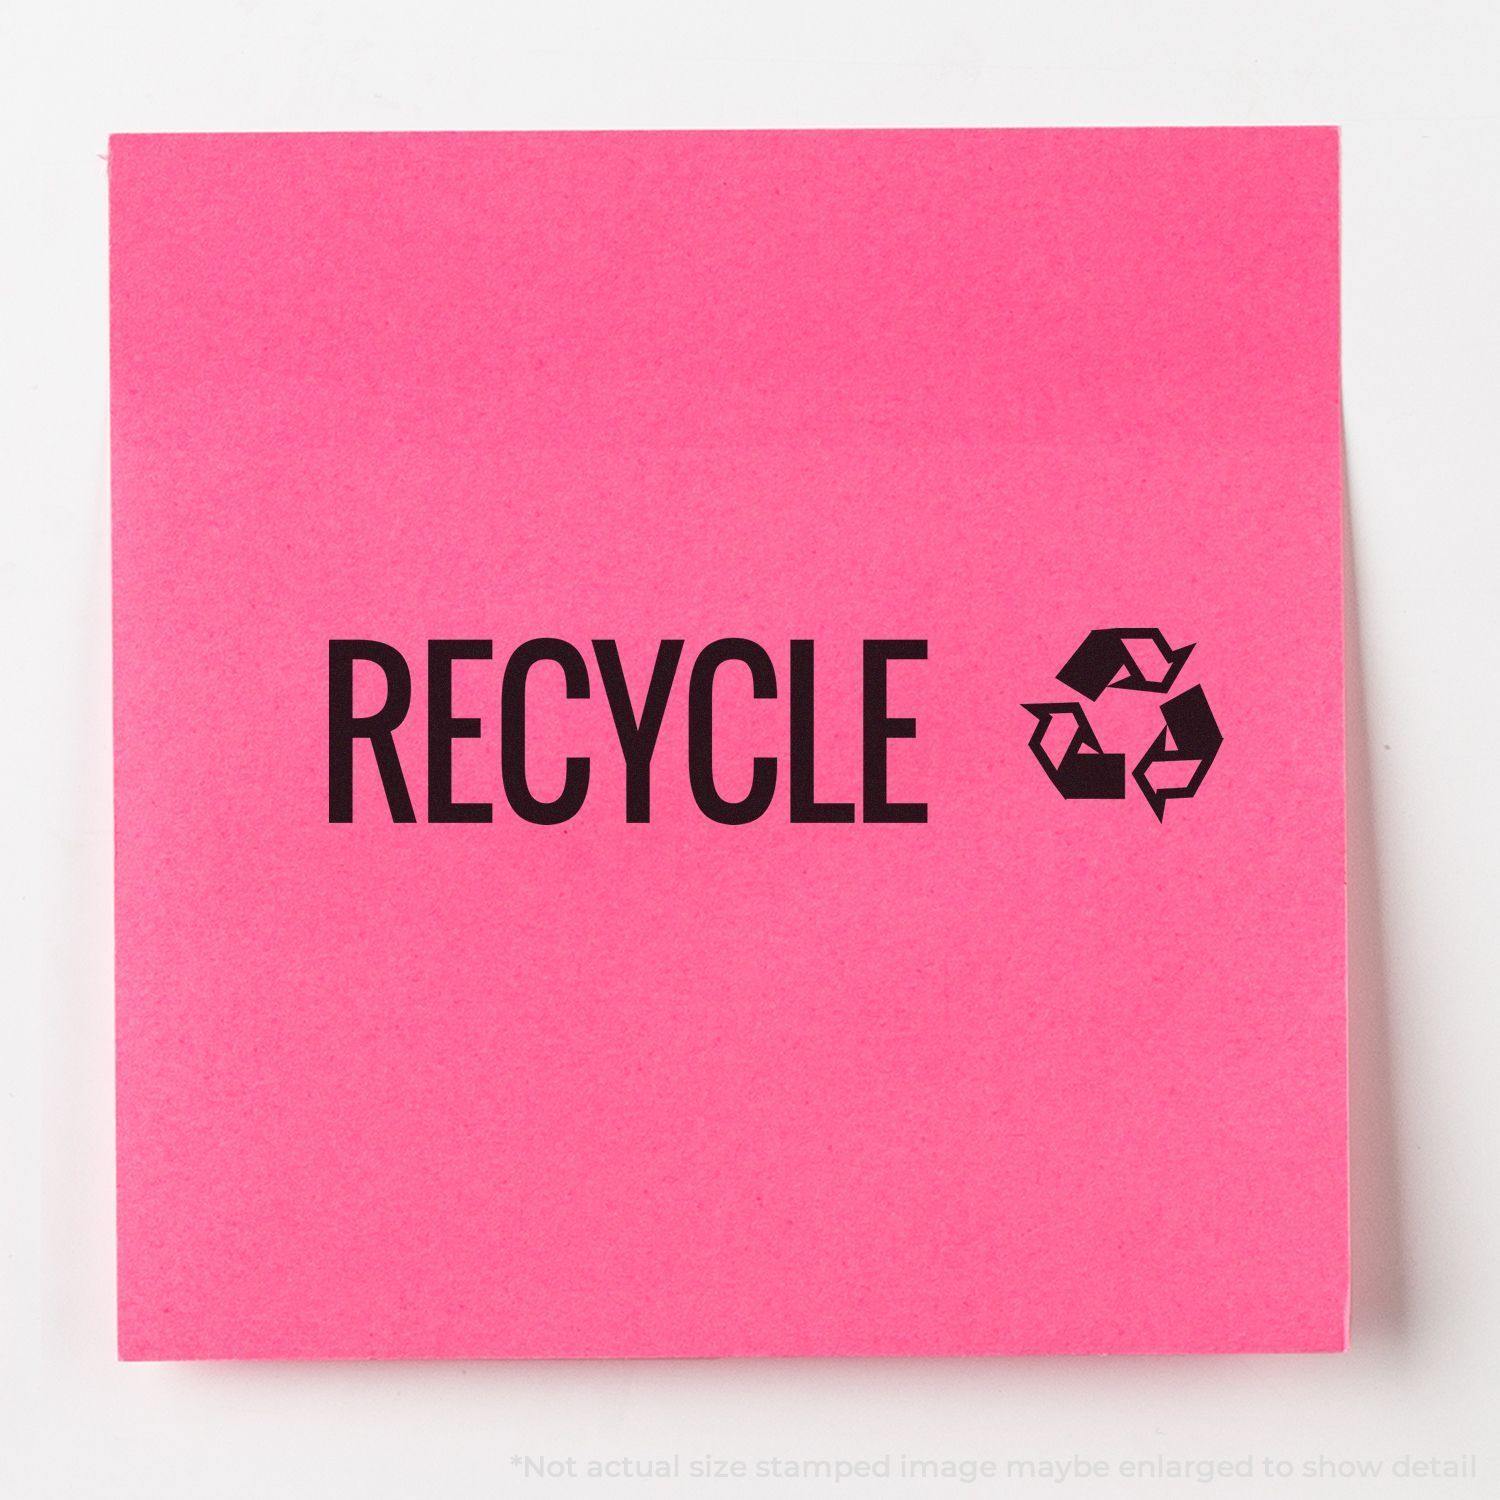 A stock office rubber stamp with a stamped image showing how the text "RECYCLE" in a large font with the recycling icon on the right side is displayed after stamping.